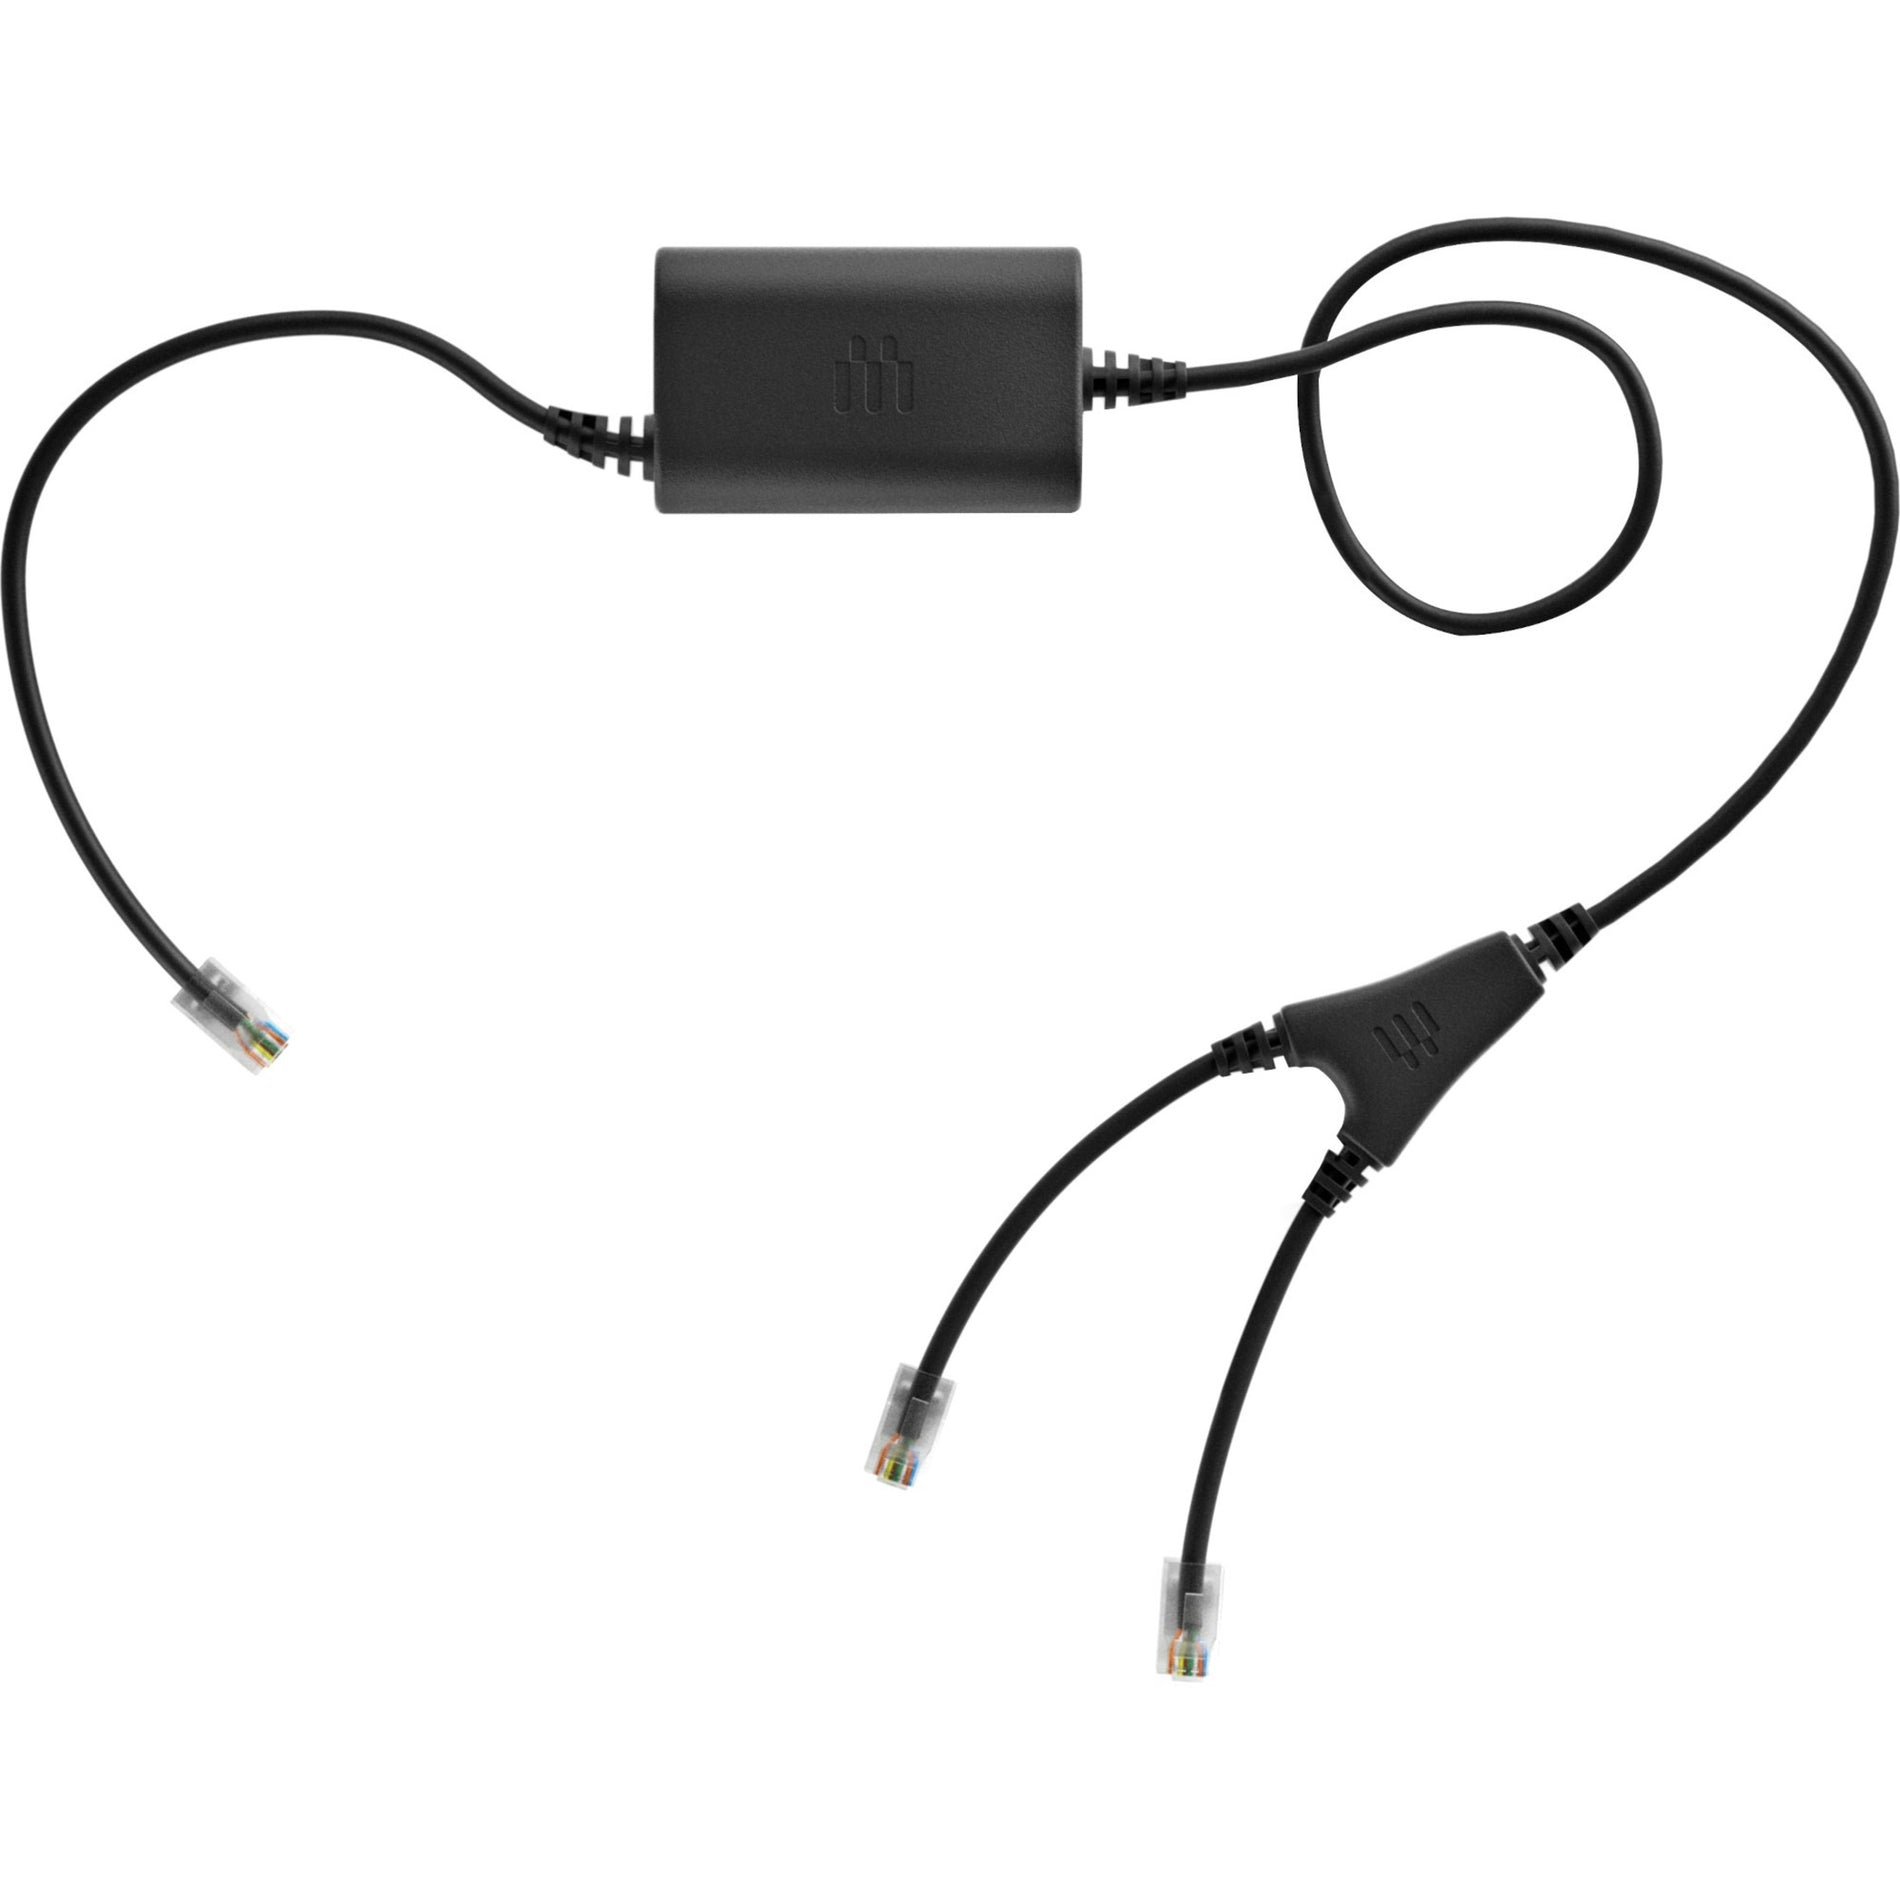 EPOS 1000740 Avaya Electronic Hook Switch Cable CEHS-AV 03, Compatible with EPOS Wireless Headsets and Avaya IP Phones